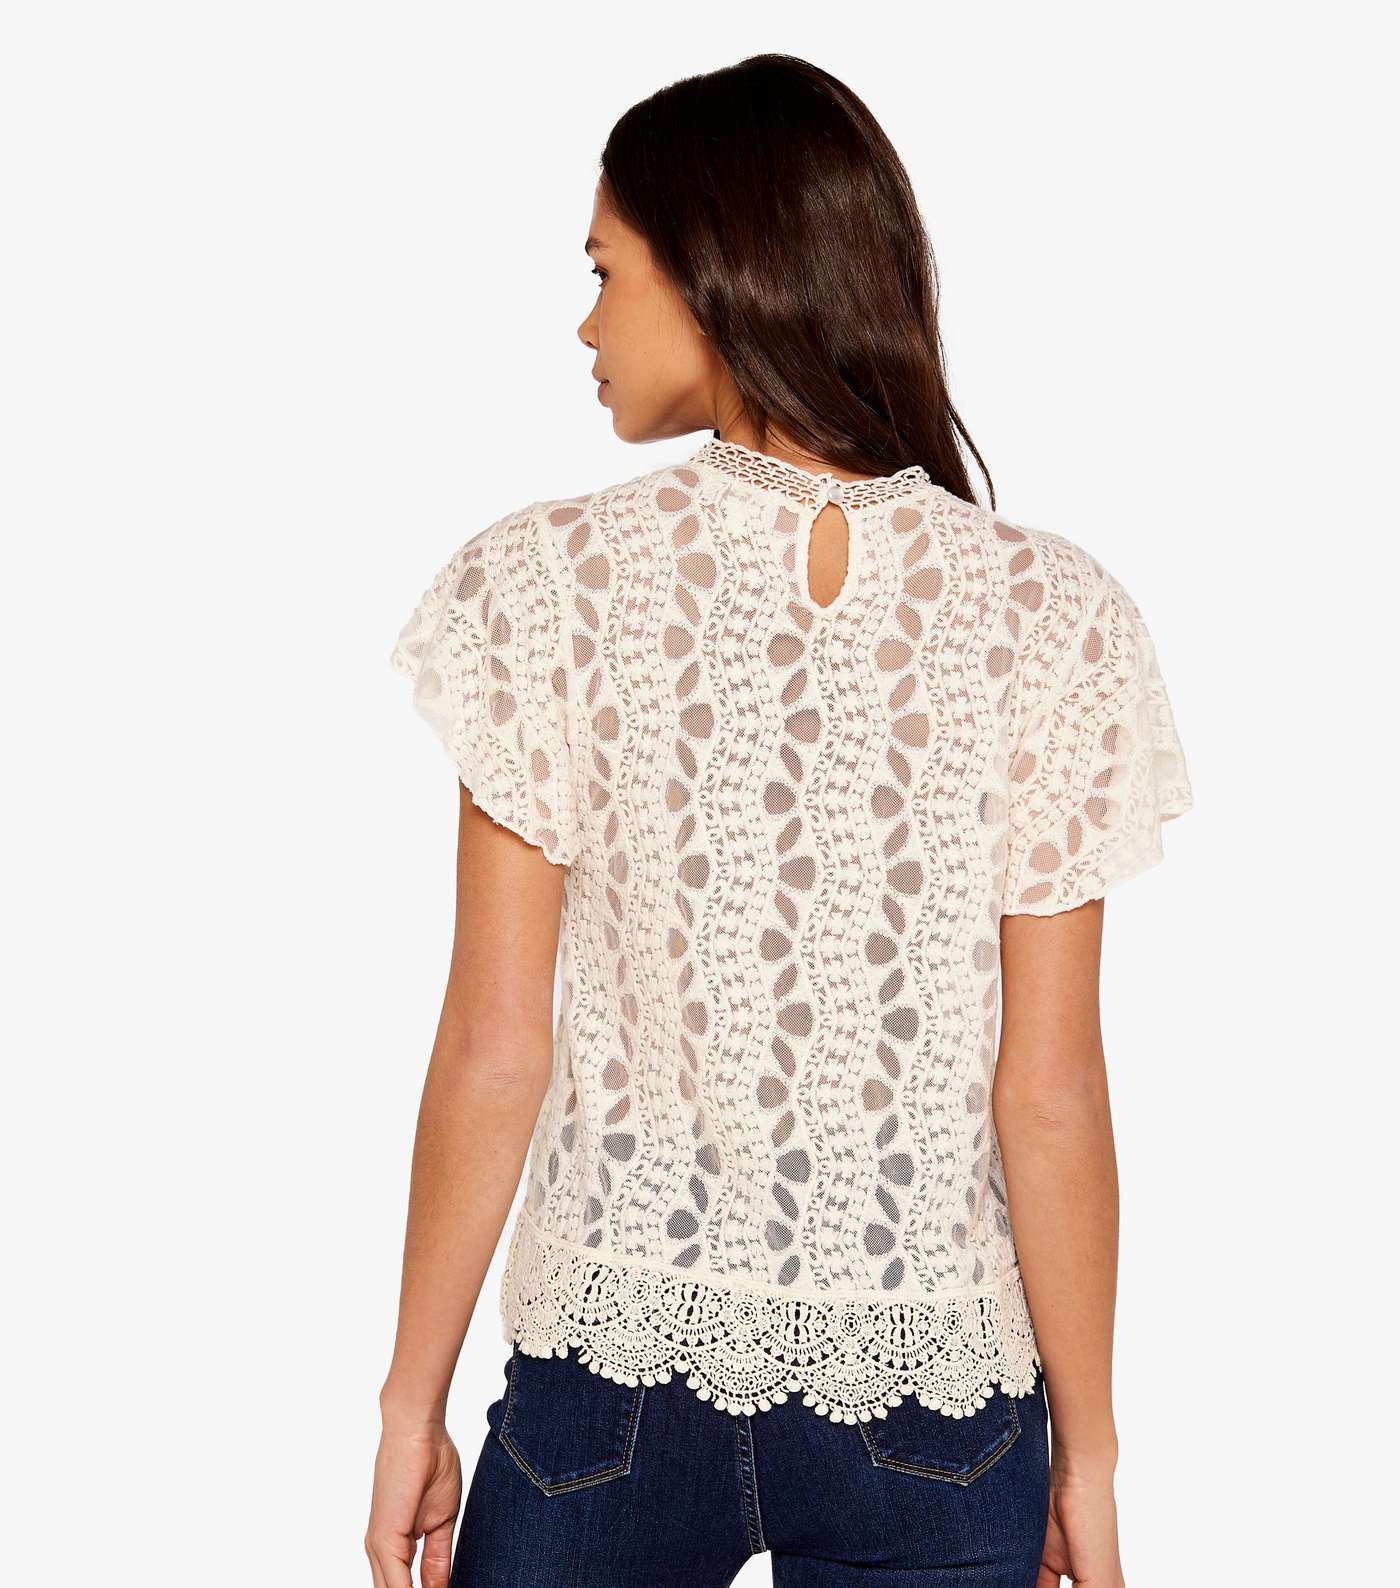 Apricot Stone Embroidered Scallop Hem Top Image 3